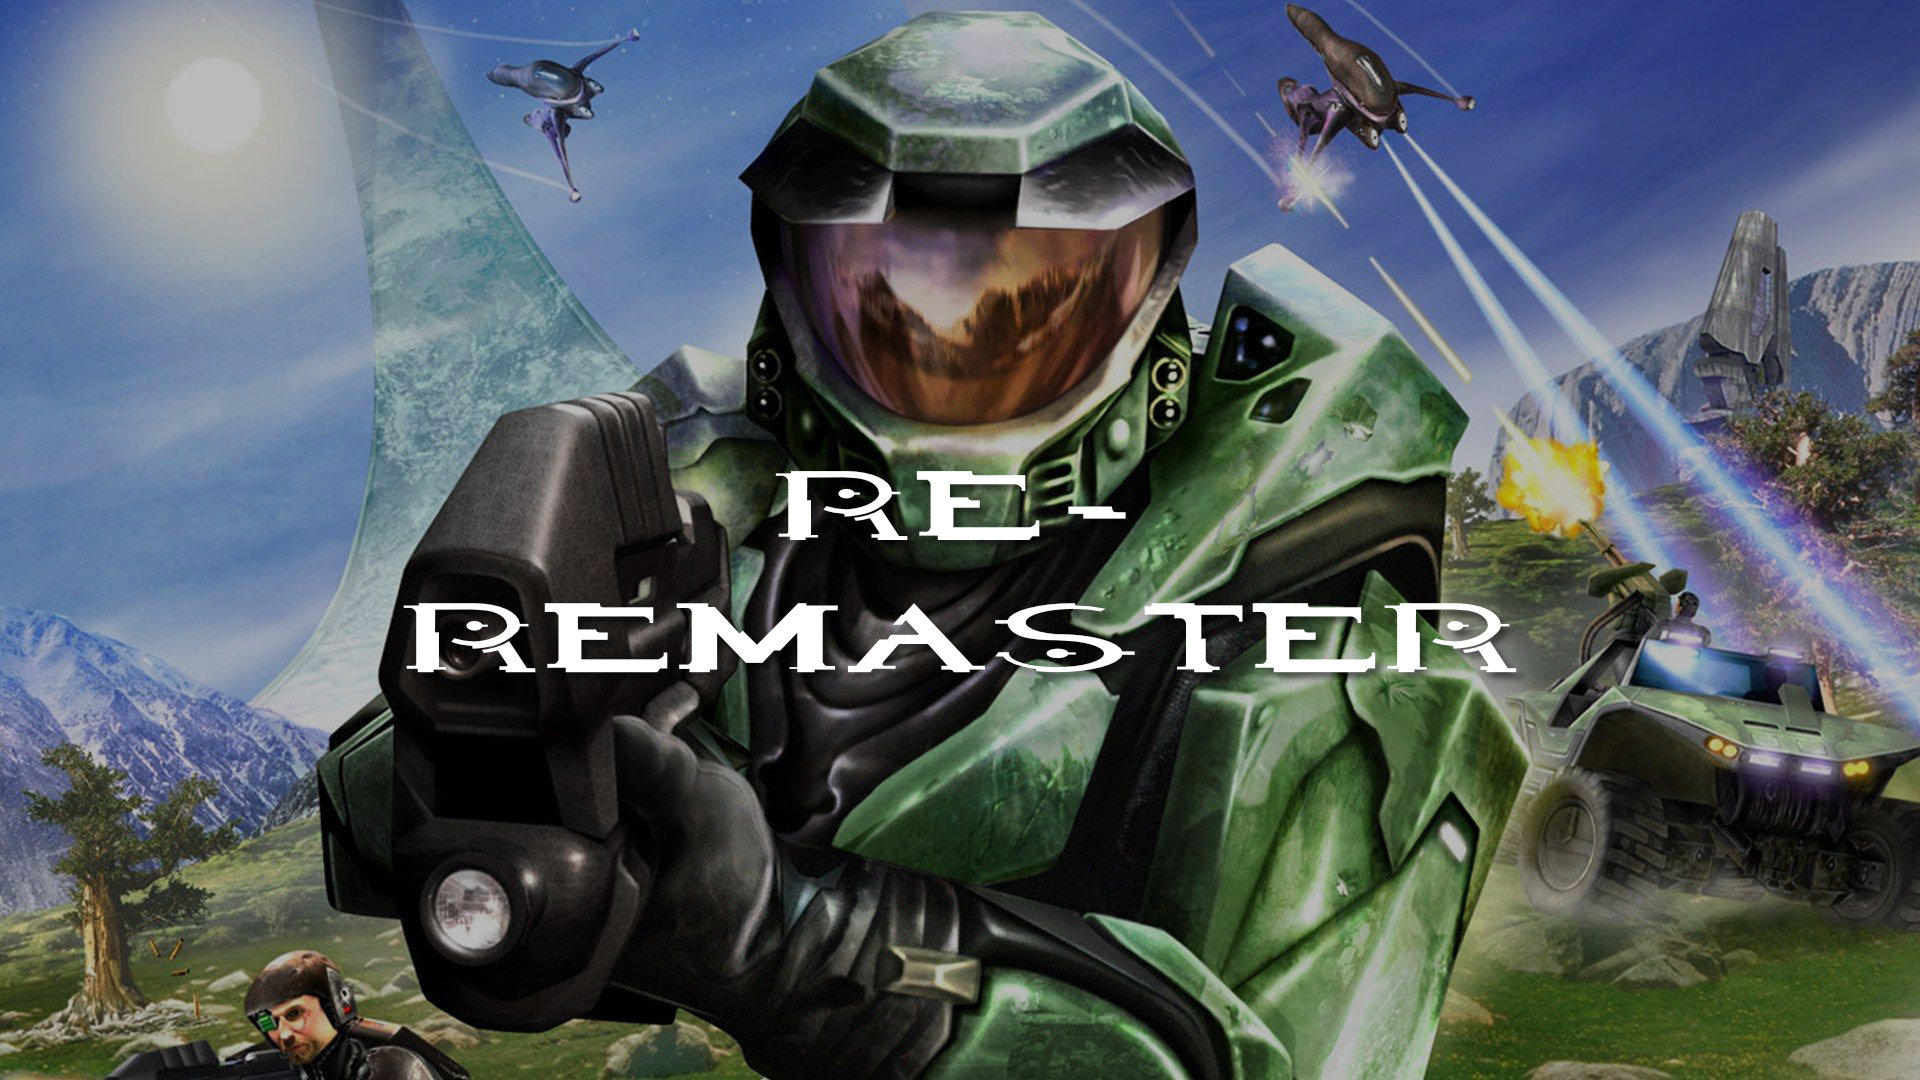 Halo: Combat Evolved is getting another remaster, according to insider ...